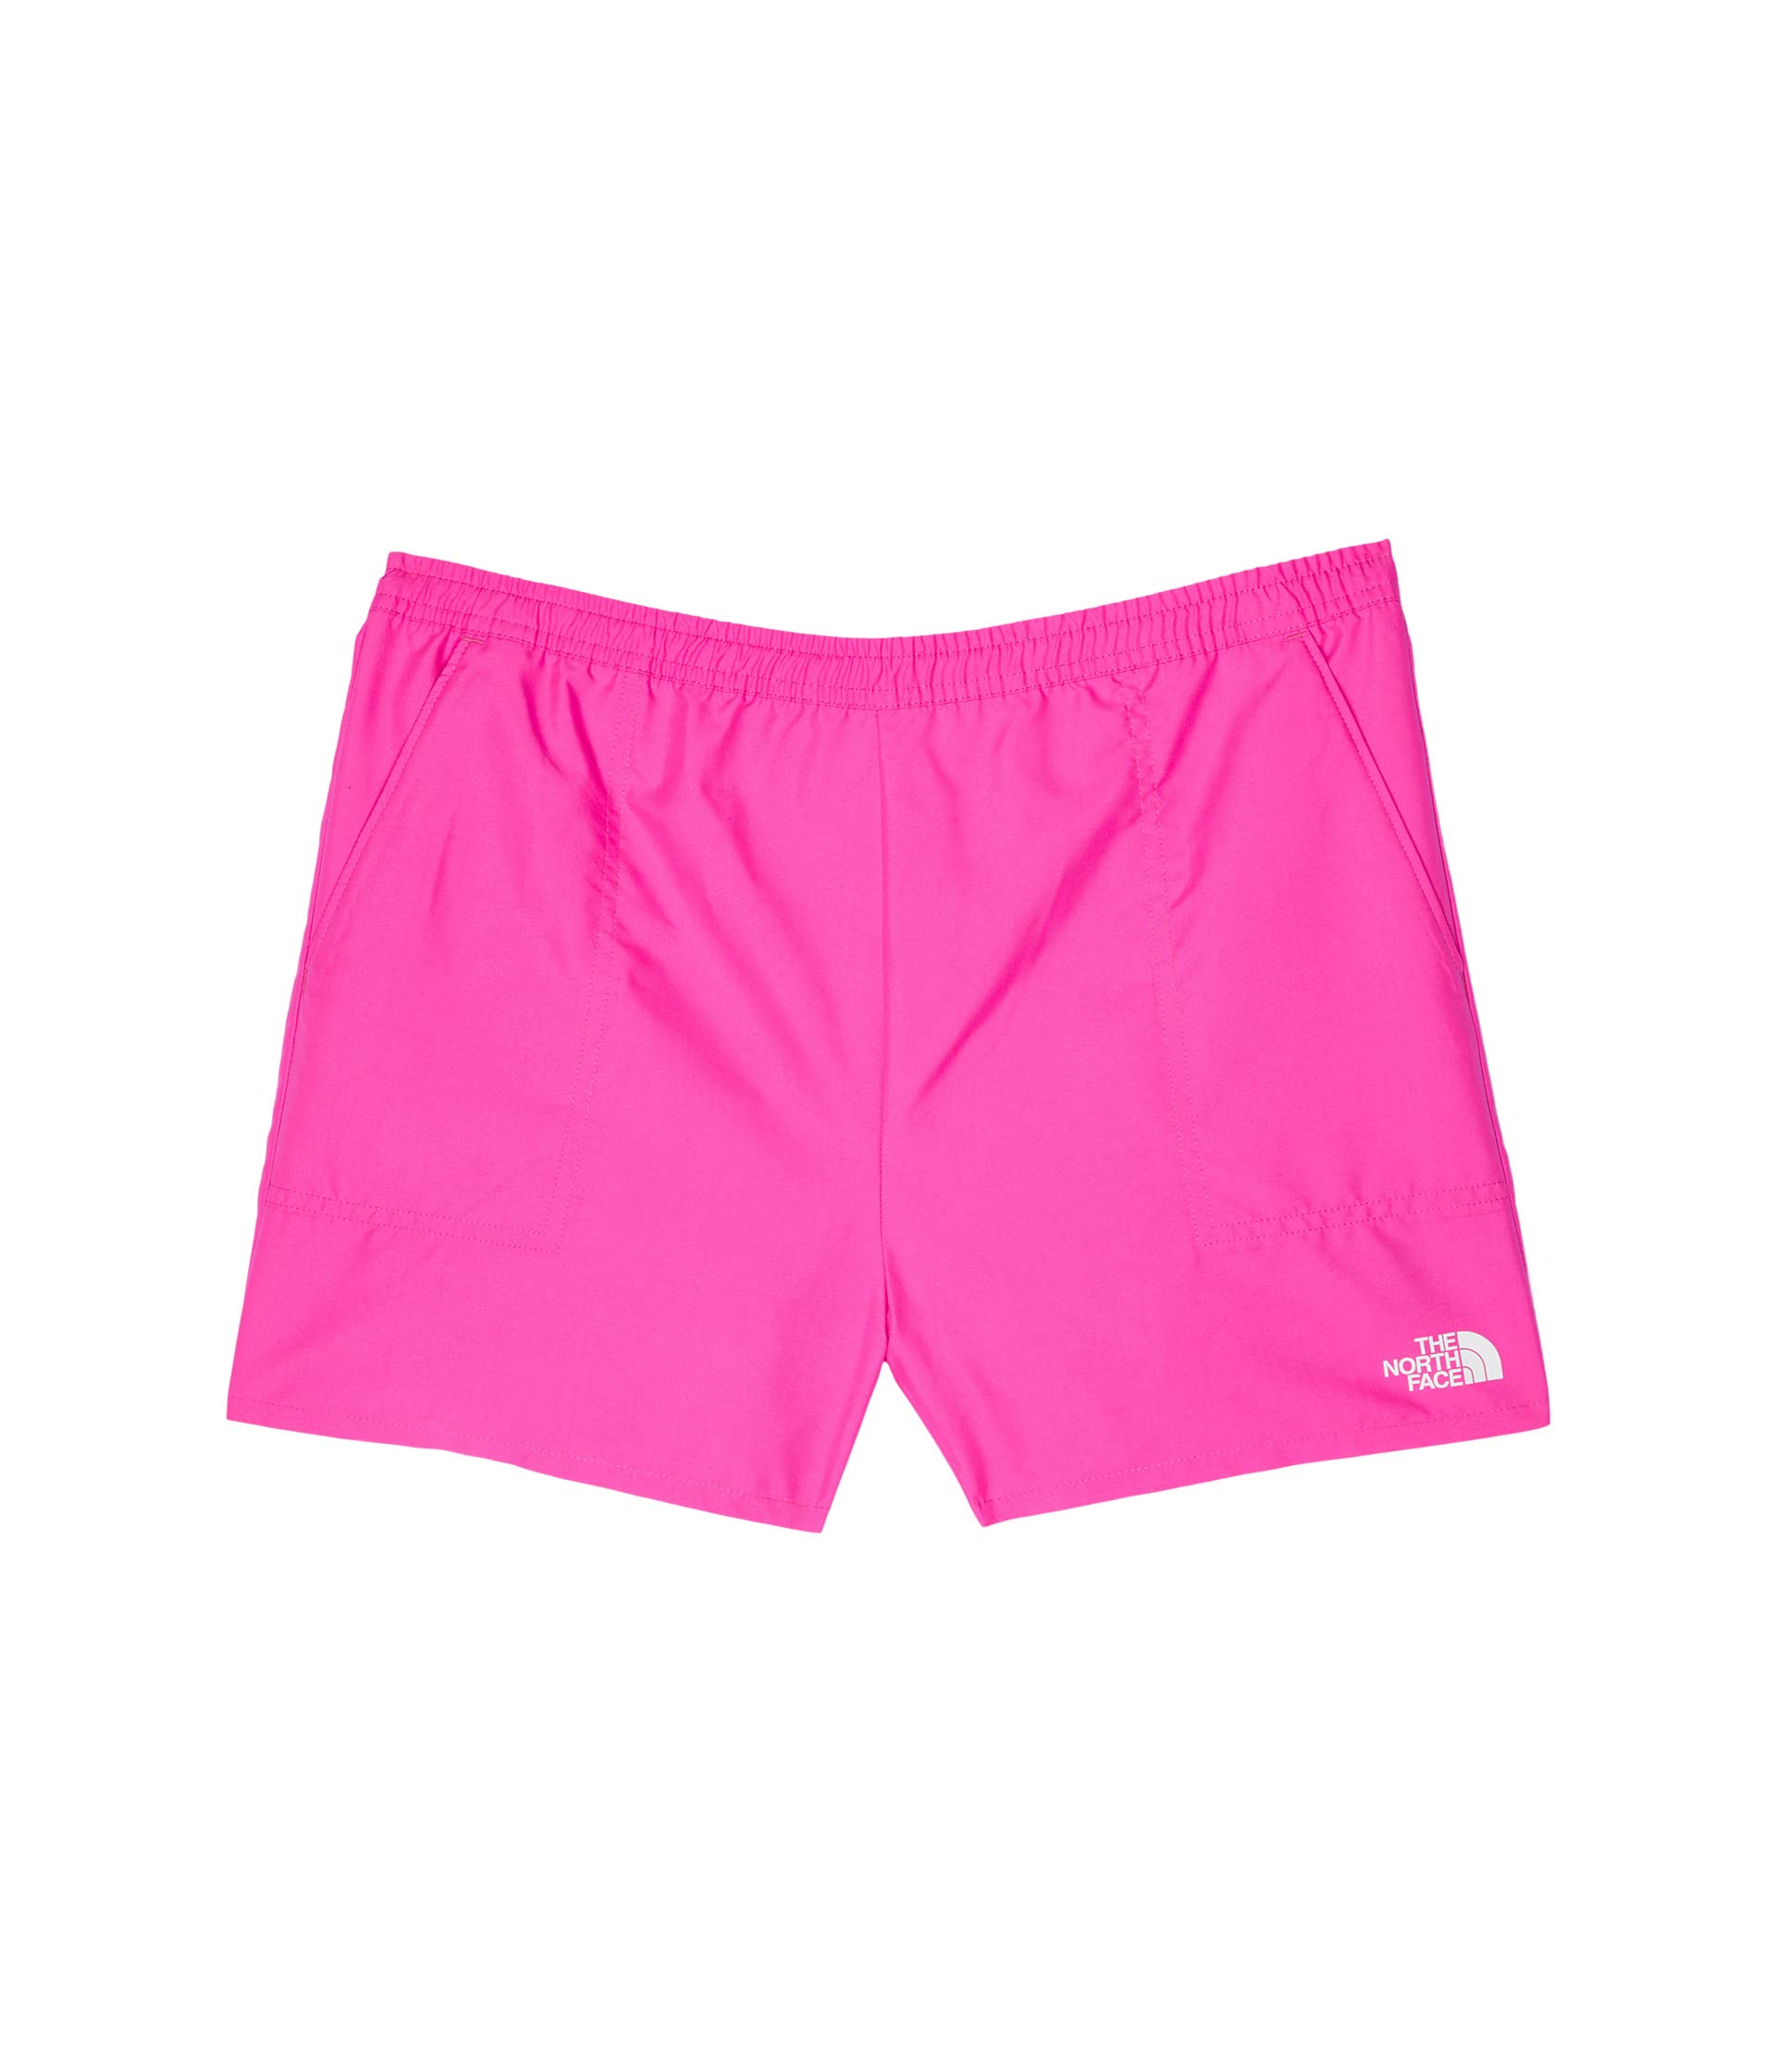 Шорты The North Face Kids, Class V Water Shorts шорты the north face kids class v water shorts